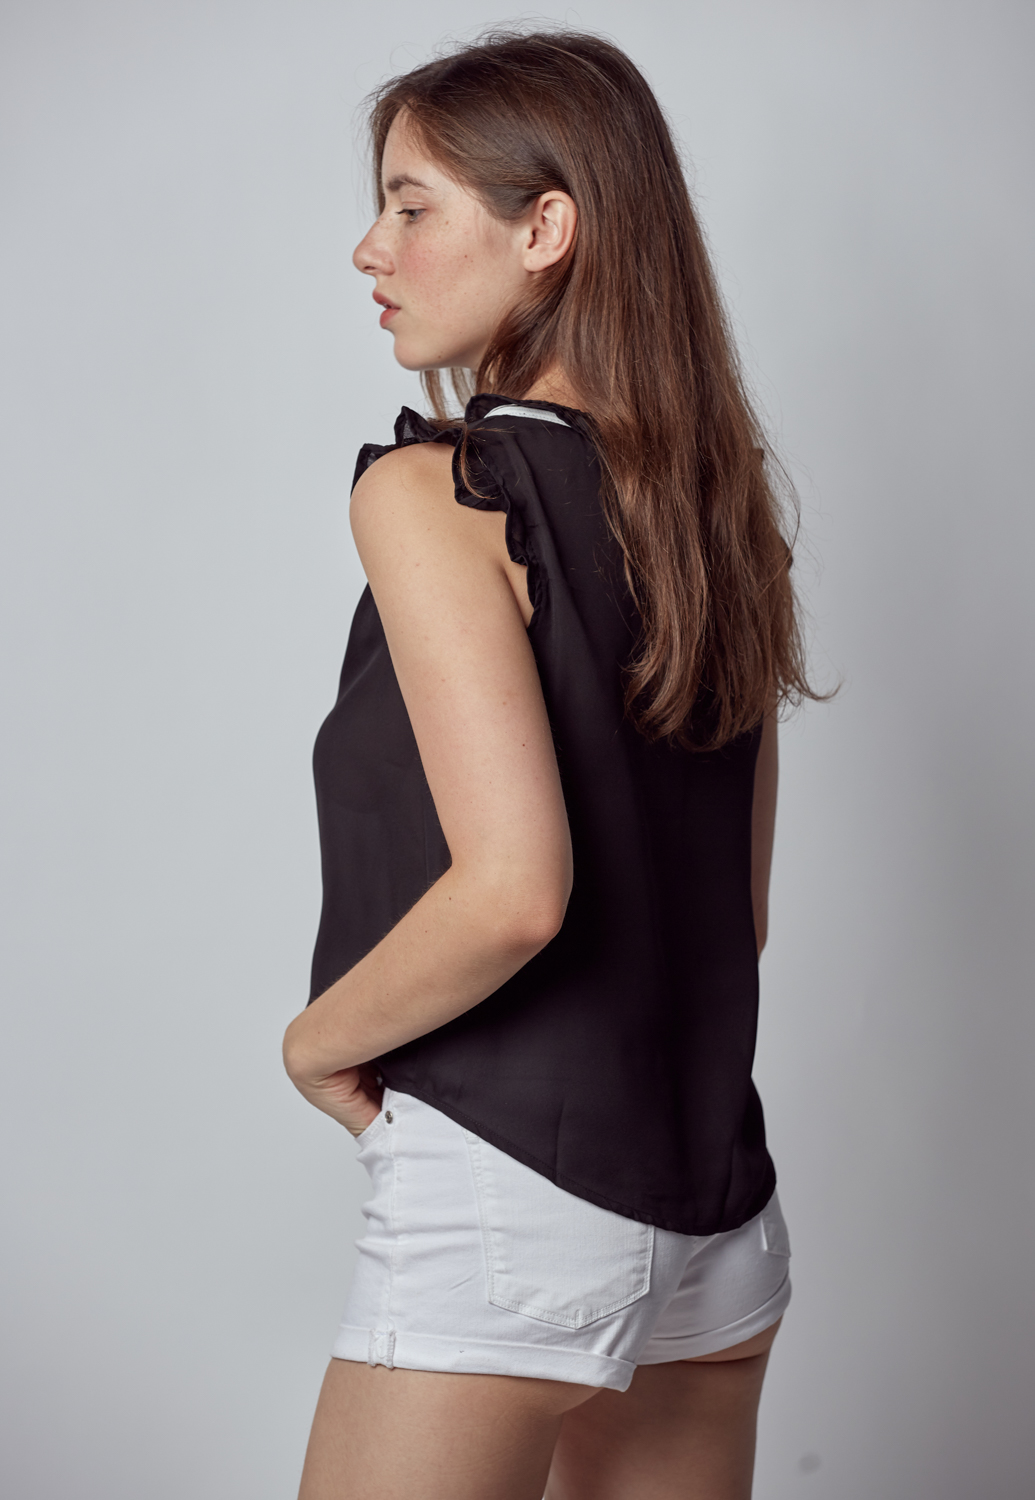 Front Tie Top With Ruffled Neck Detailing 